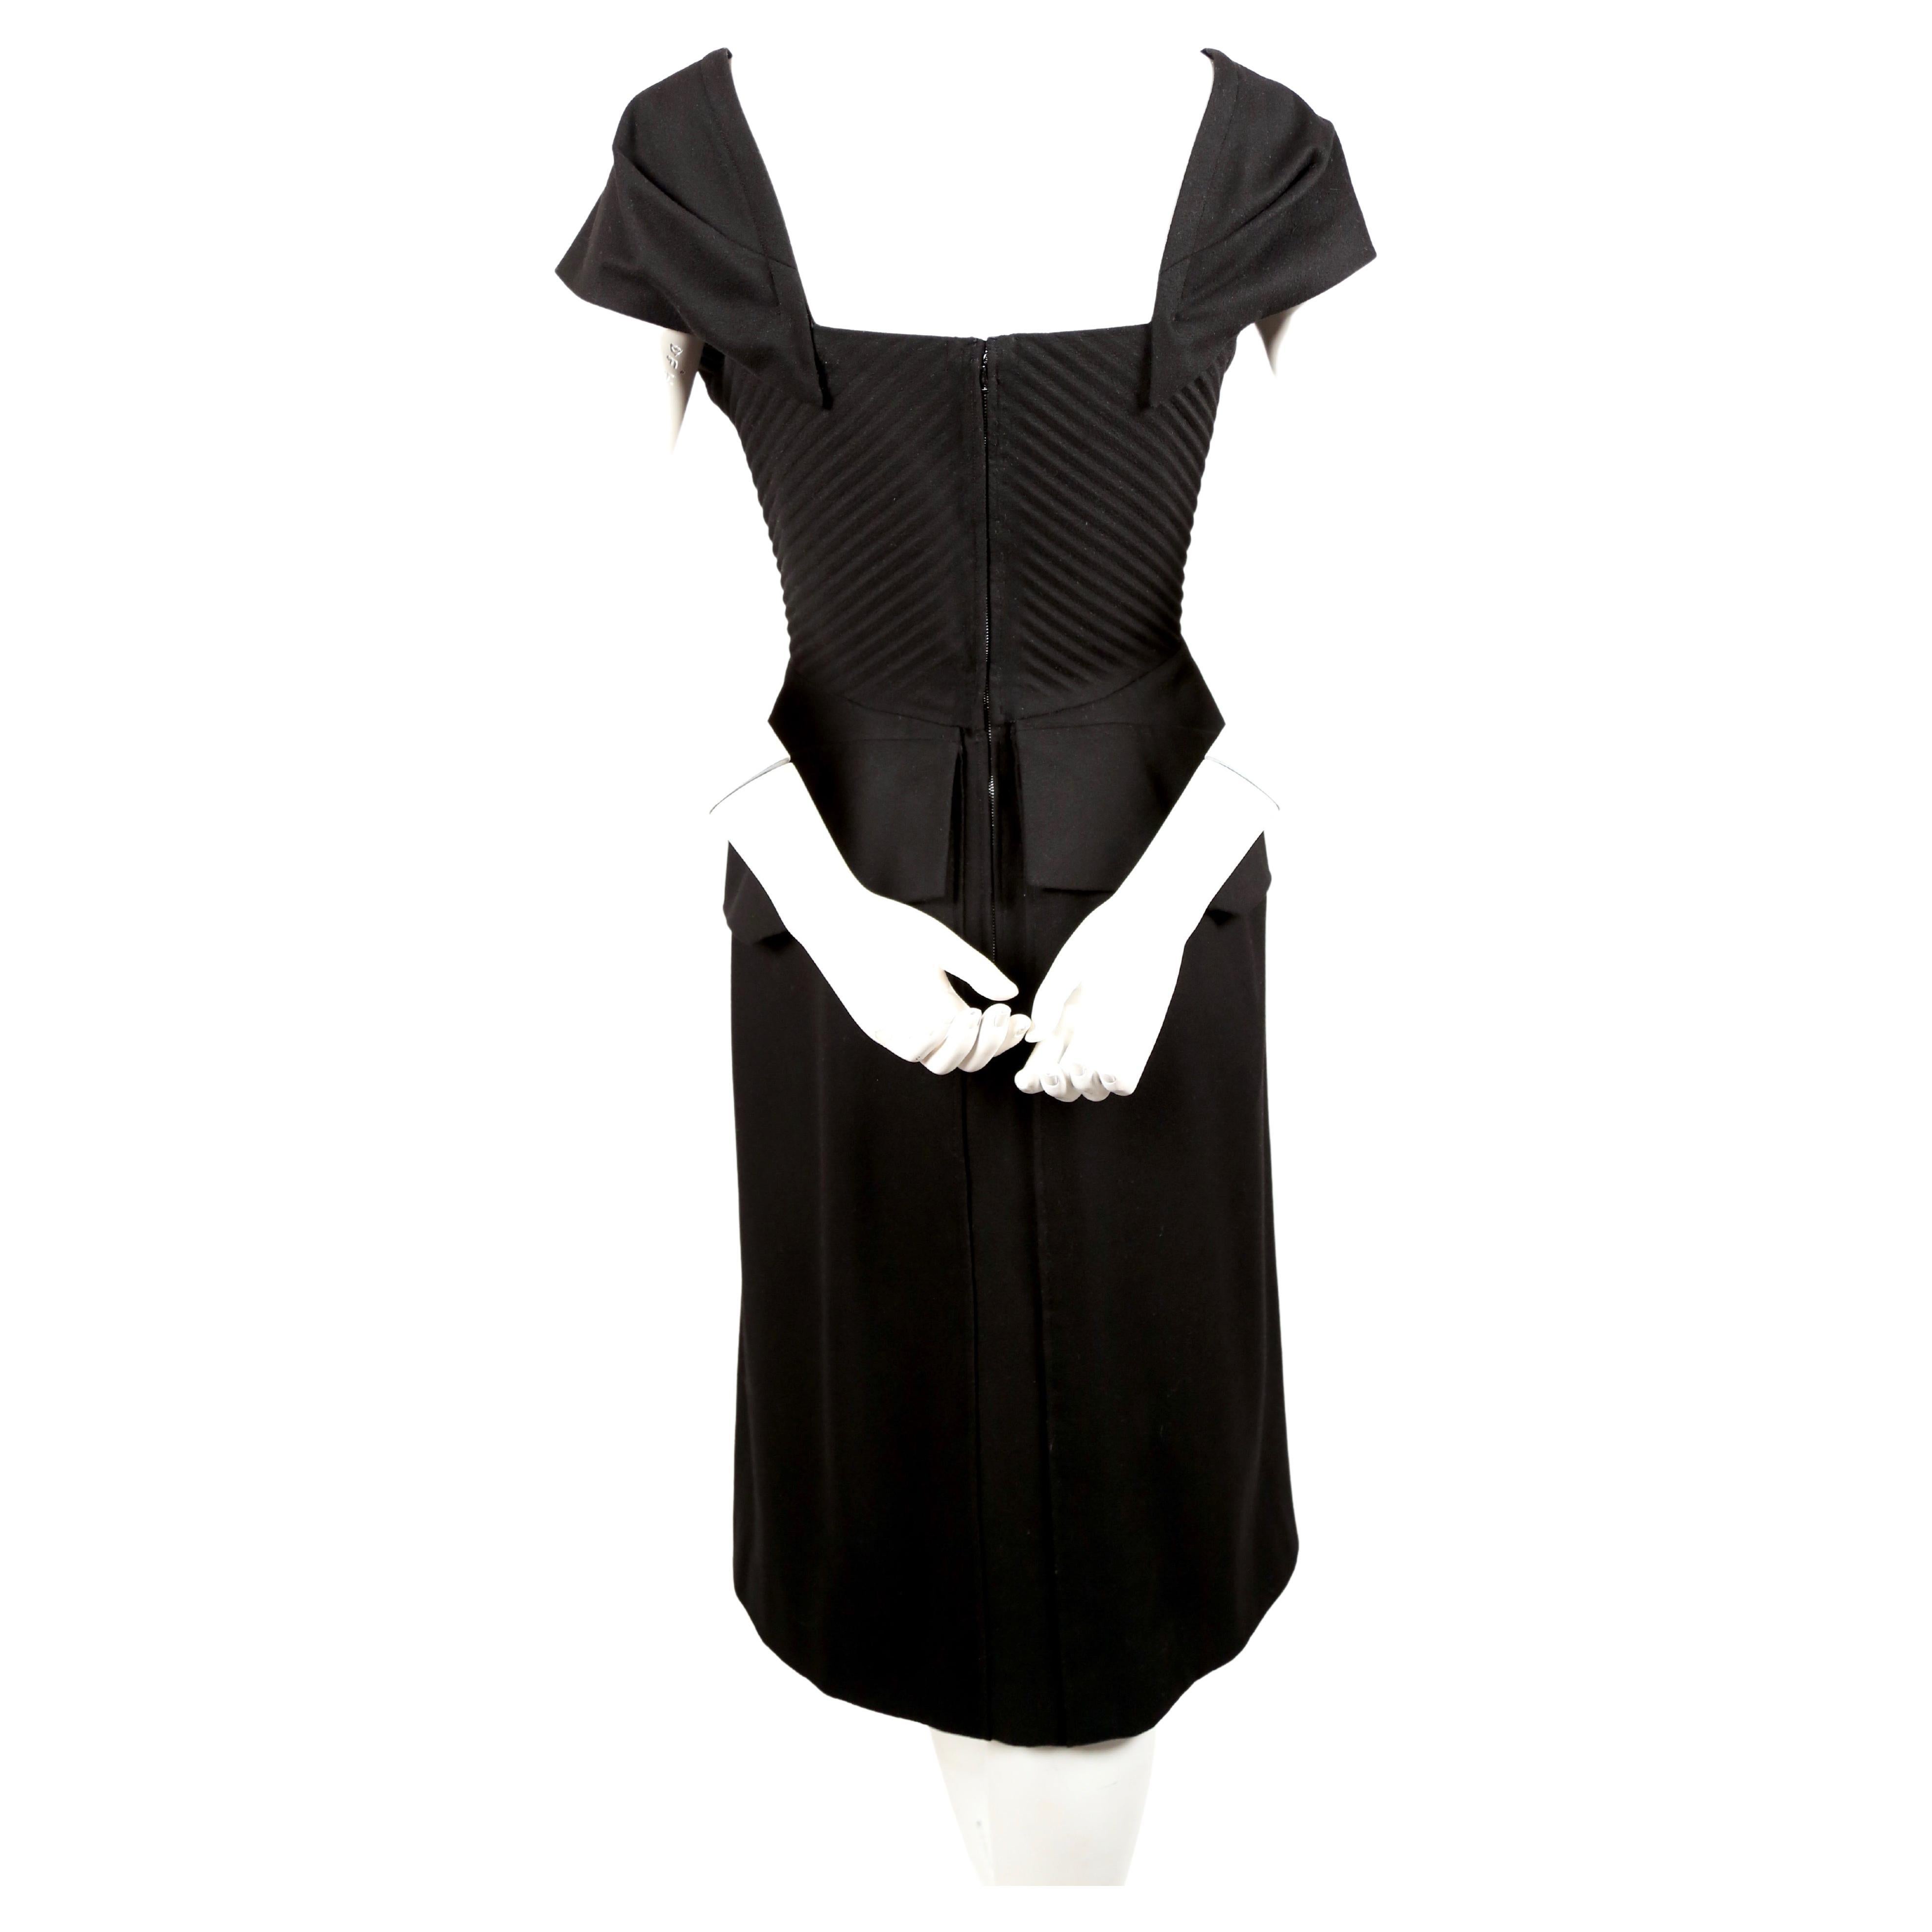 Jet-black wool, haute couture dress with pleated bodice, embellished shoulder detail and peplum waist designed by the House of Worth dating to the 1940's. Best fits a US 4-6. Approximate measurements: bust 34